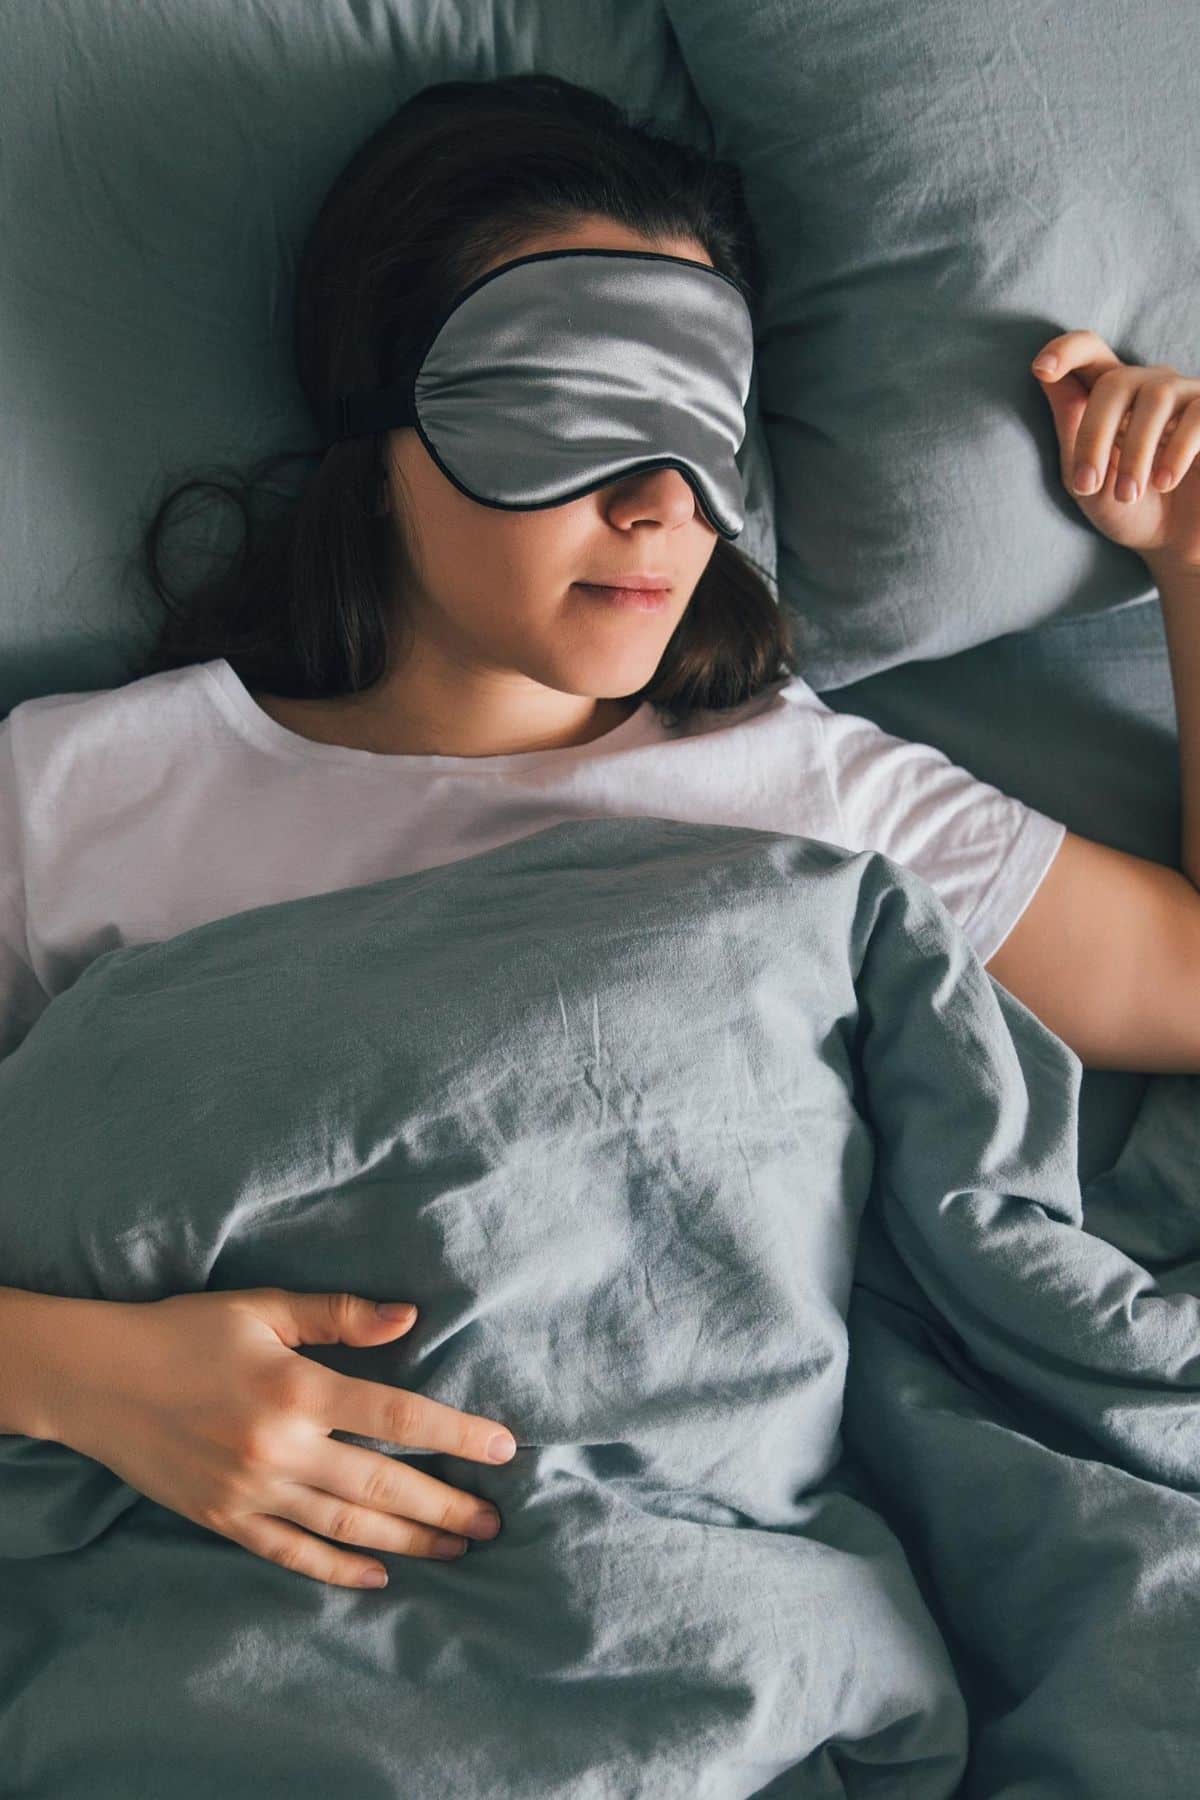 woman sleeping in bed with an eye mask